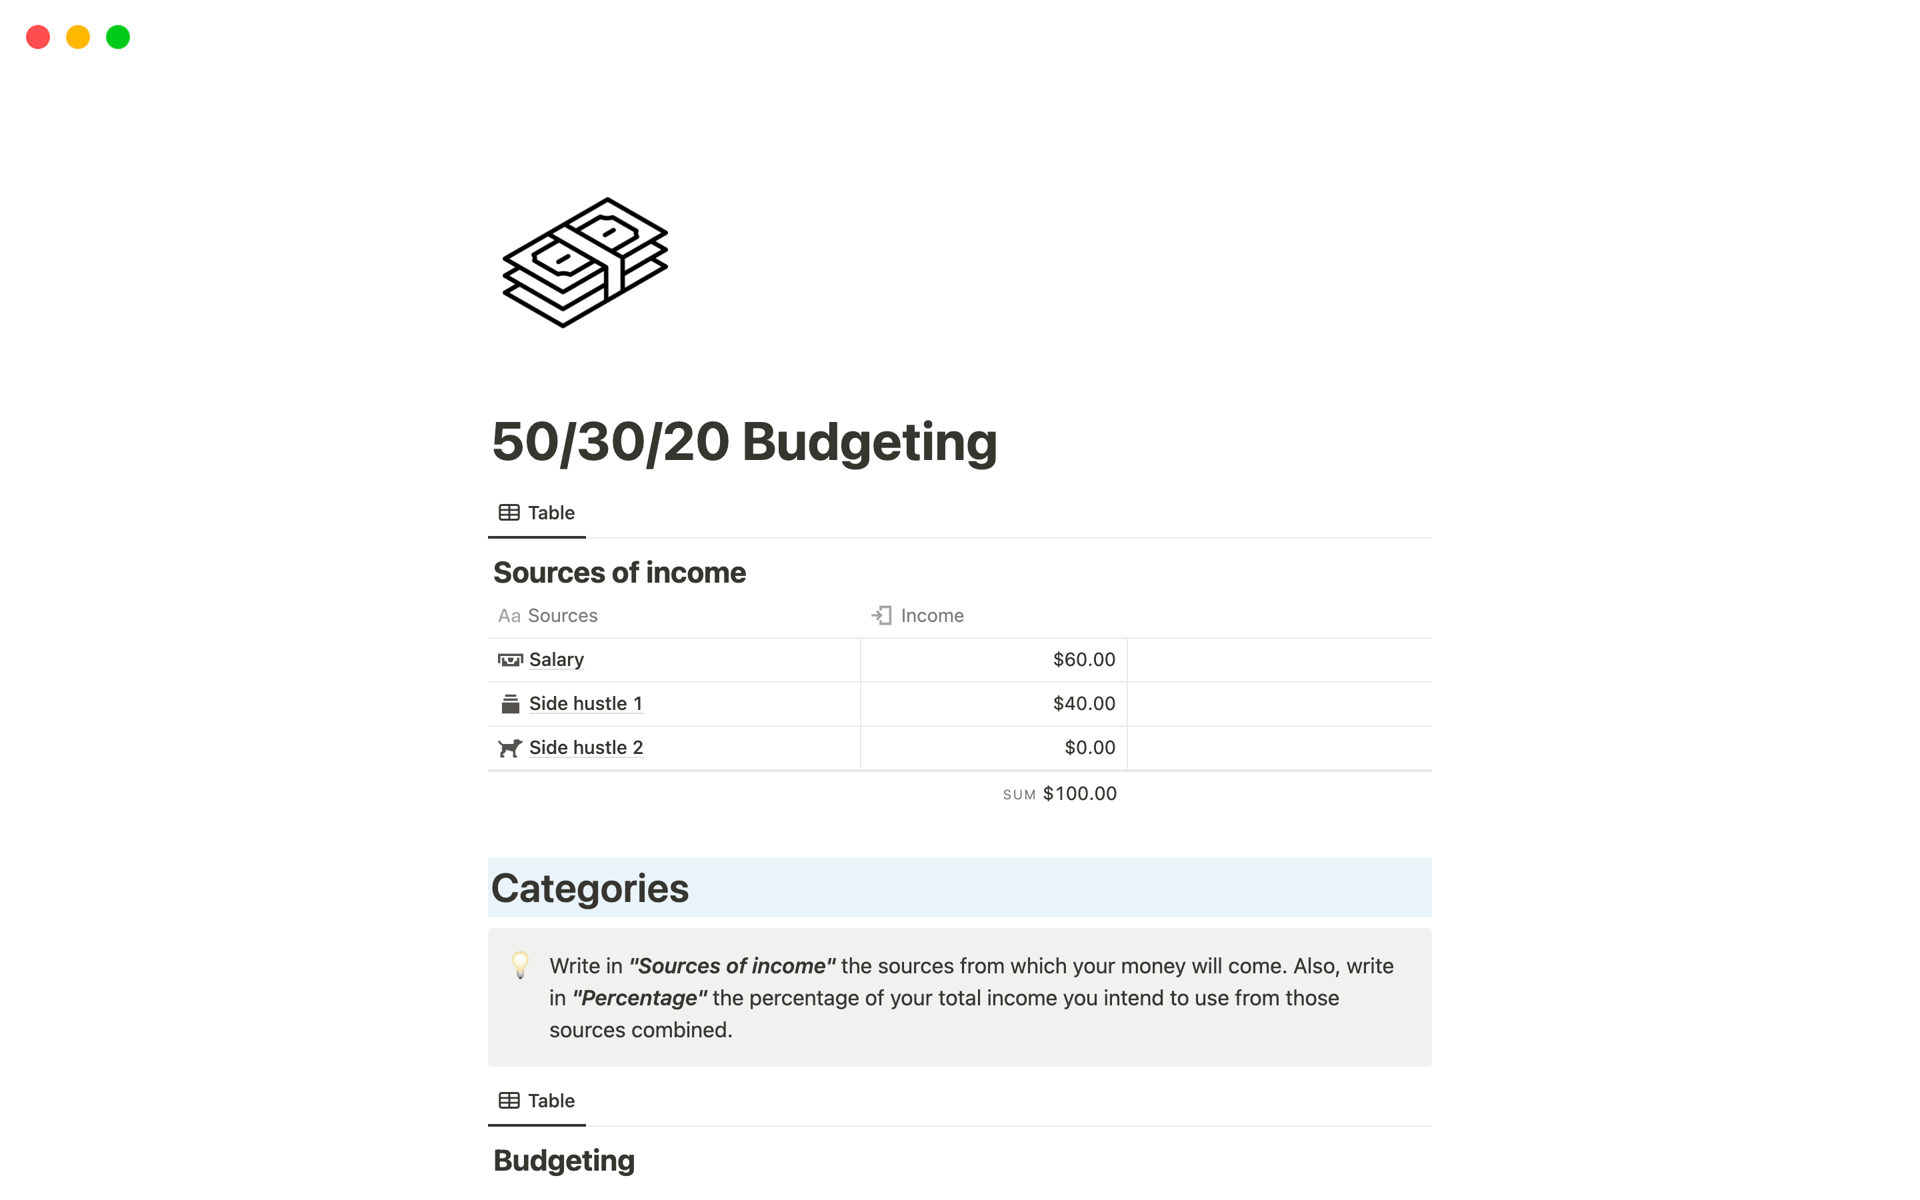 This template will help you take control of your finances, dividing your total income by percentages (50%, 30%, 20%)